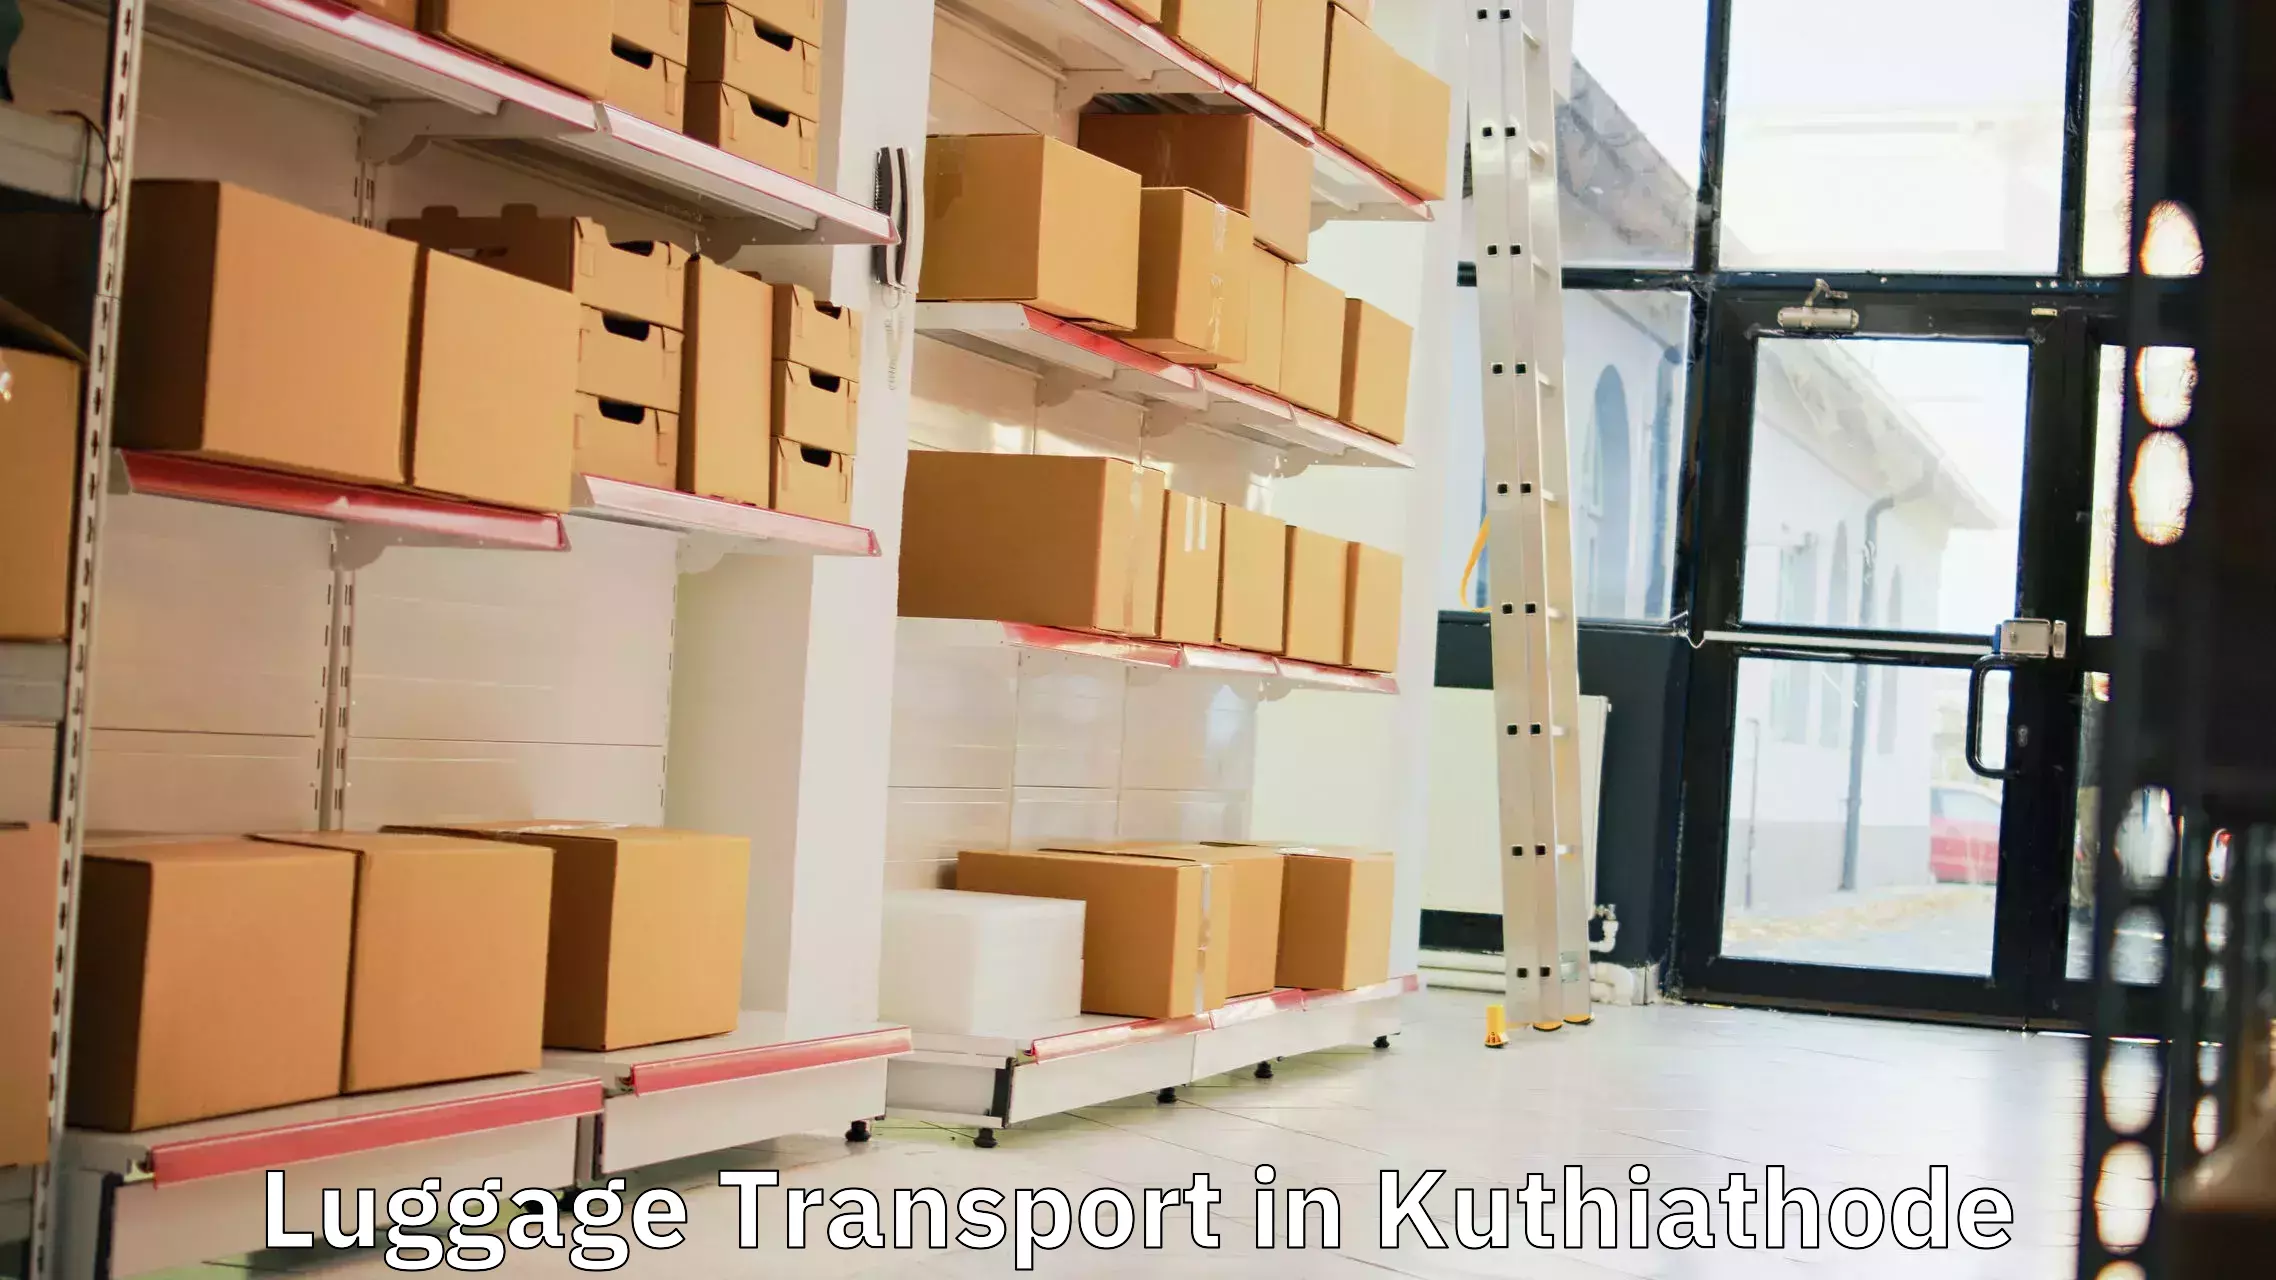 Luggage shipping trends in Kuthiathode